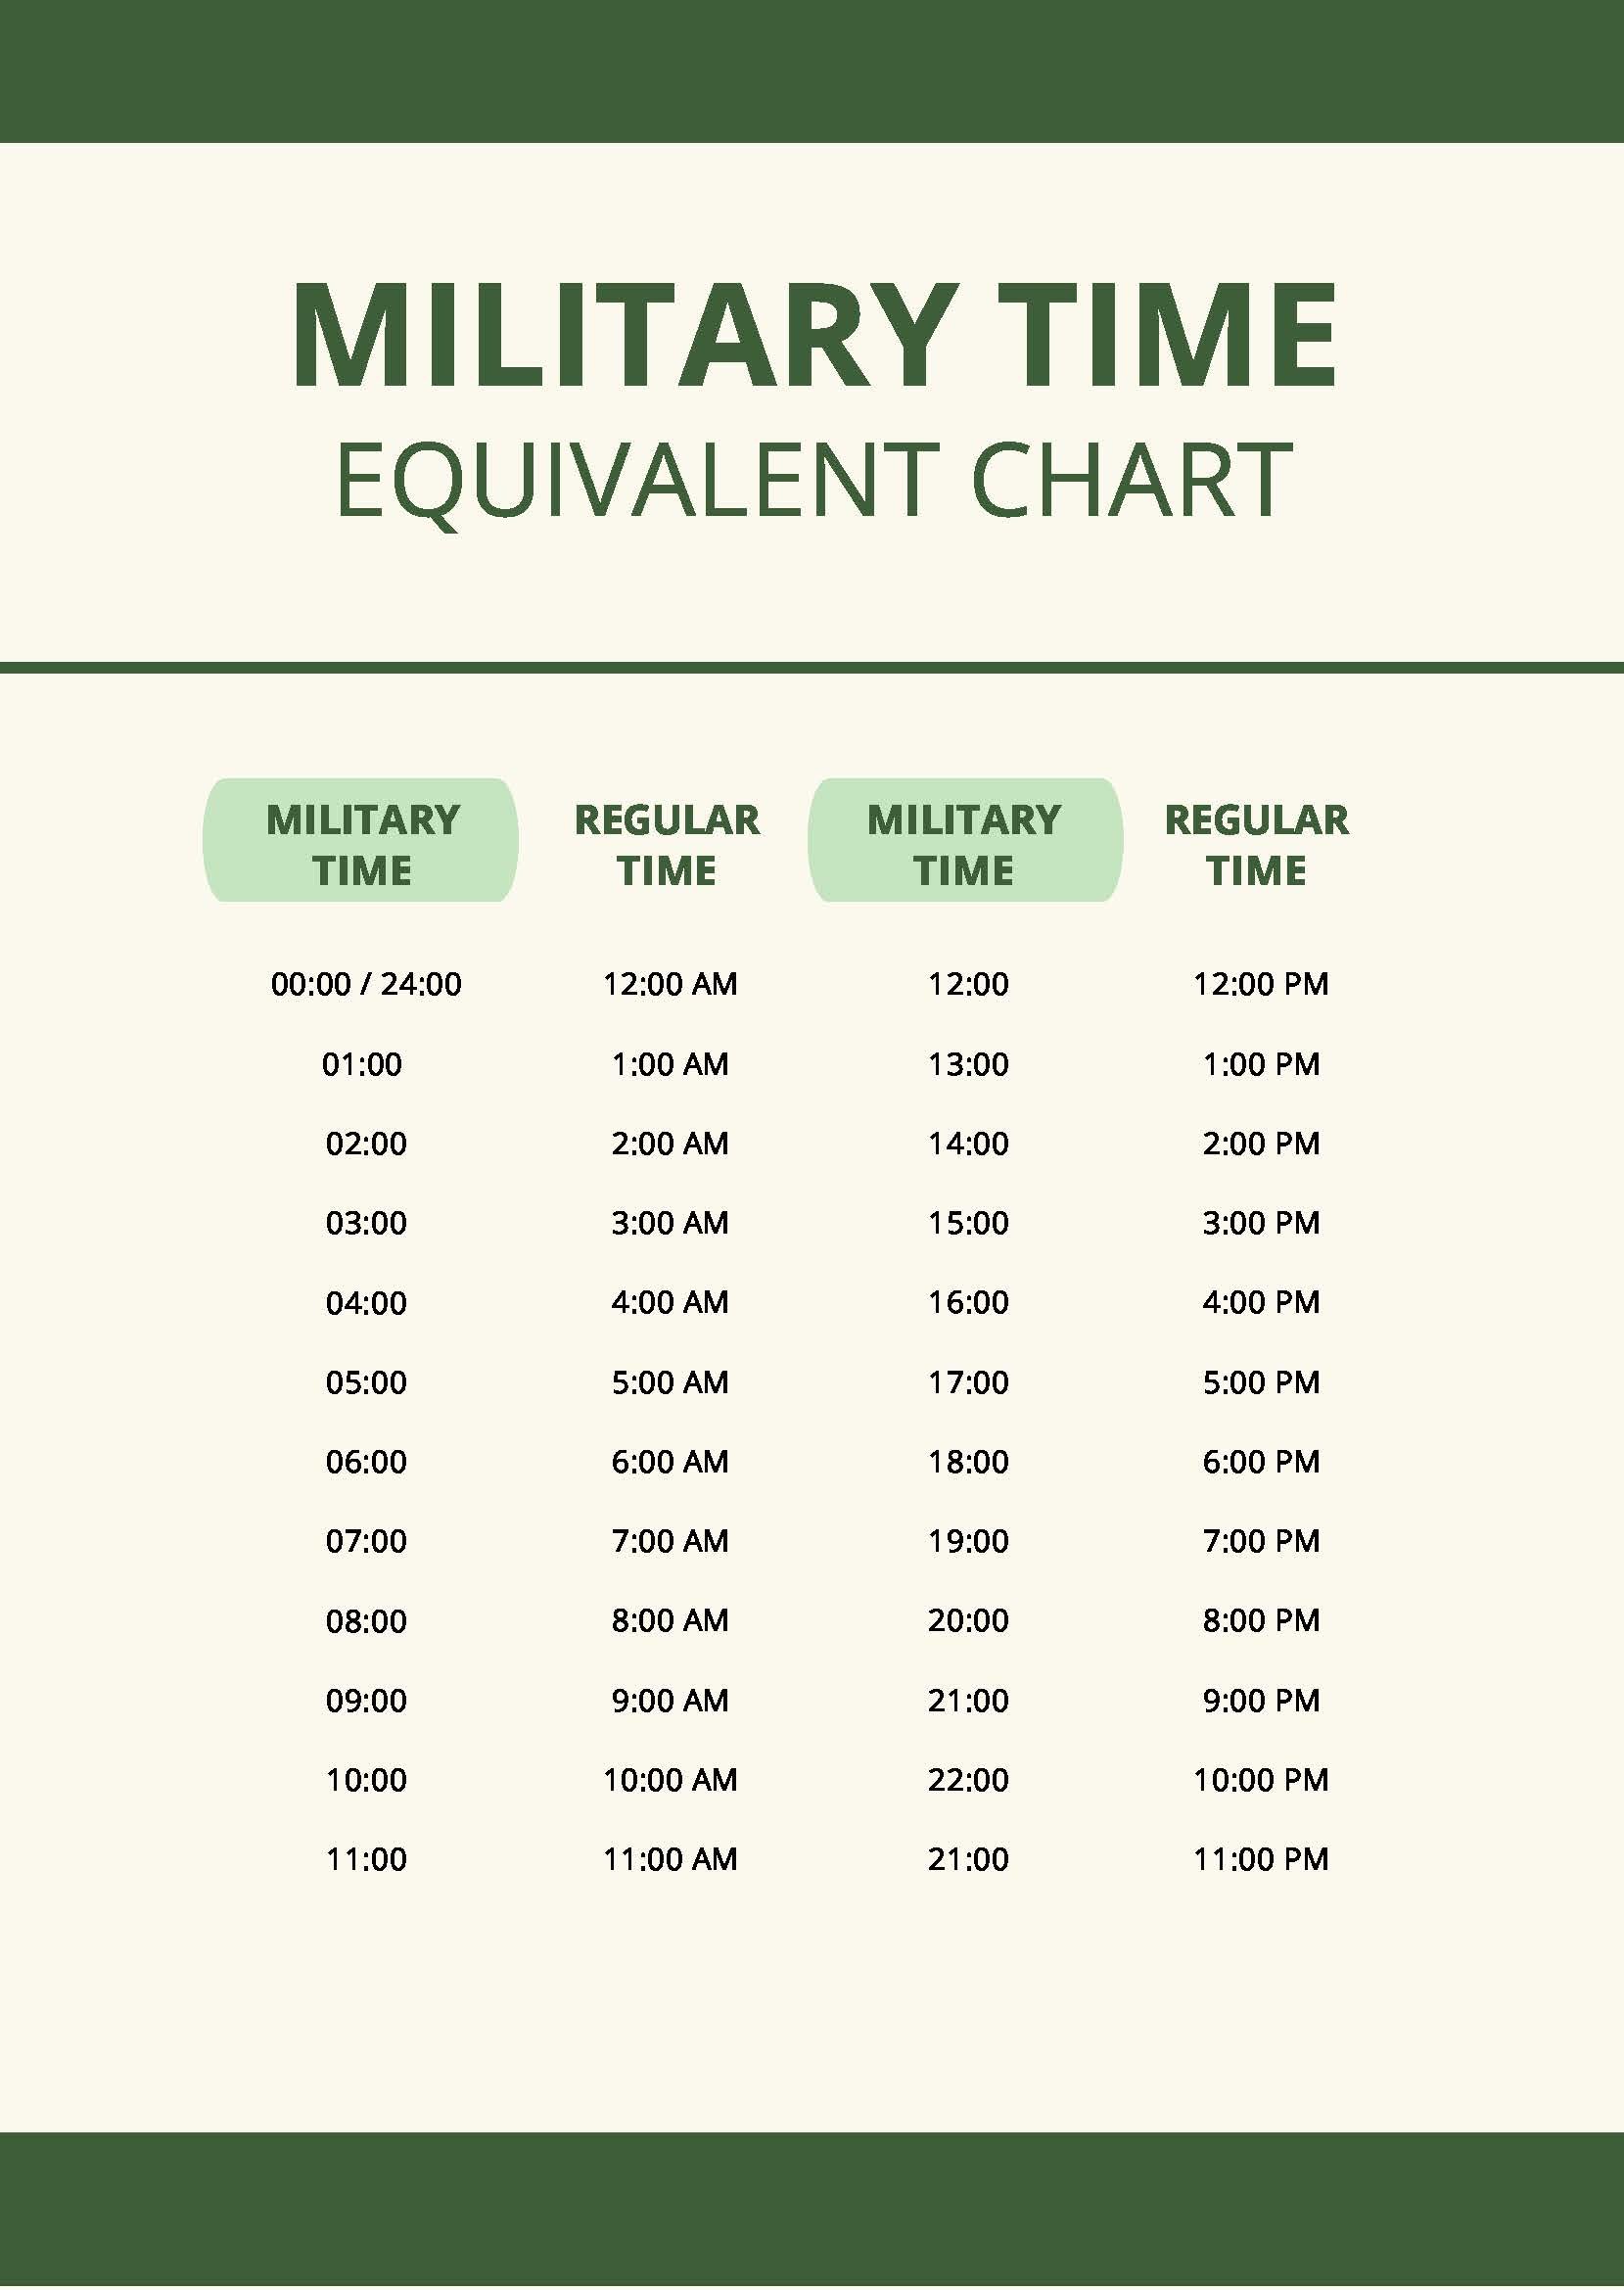 Military Time Equivalent Chart in PDF